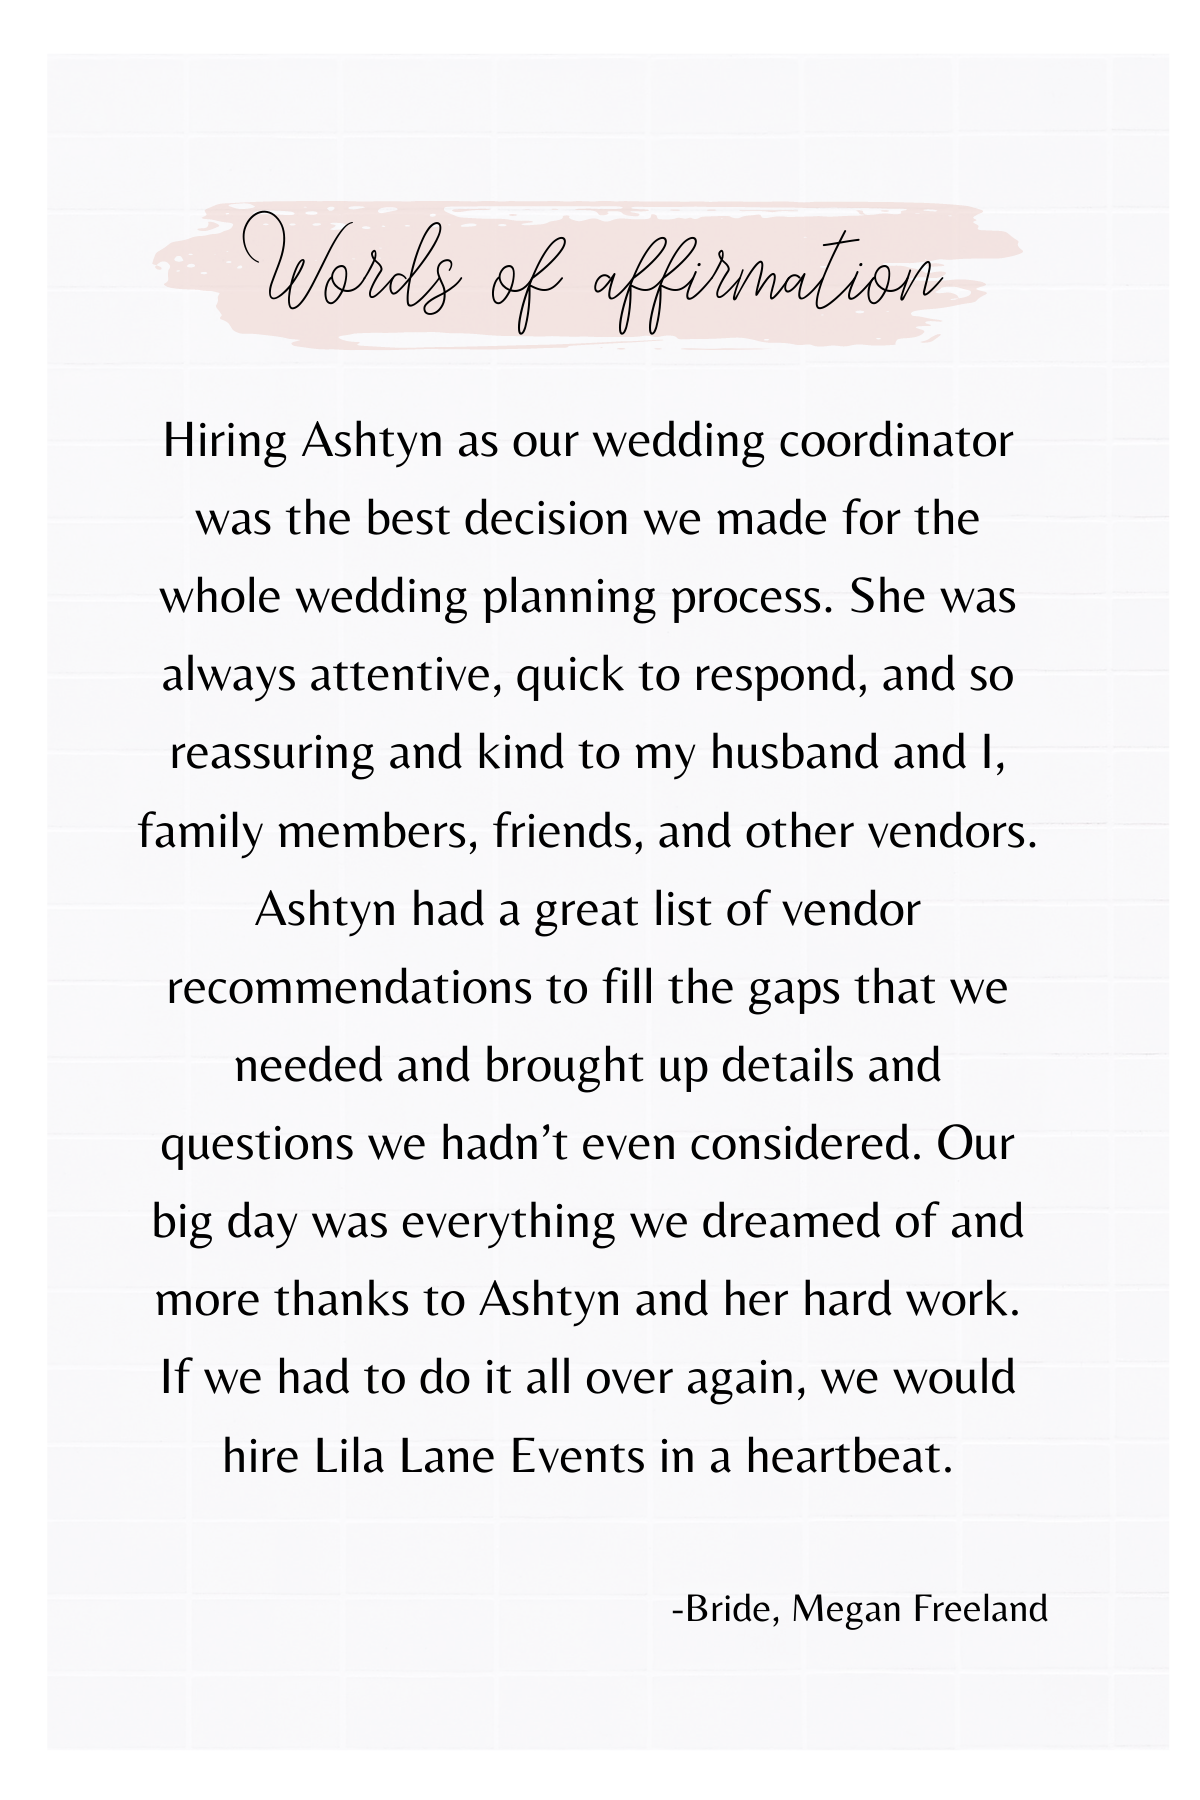 Copy of Ashtyn was absolutely amazing during the entire wedding planning process and knocked it out of the park the day of the wedding! She was extremely responsive and answered all of our questions without hesitatio copy 2